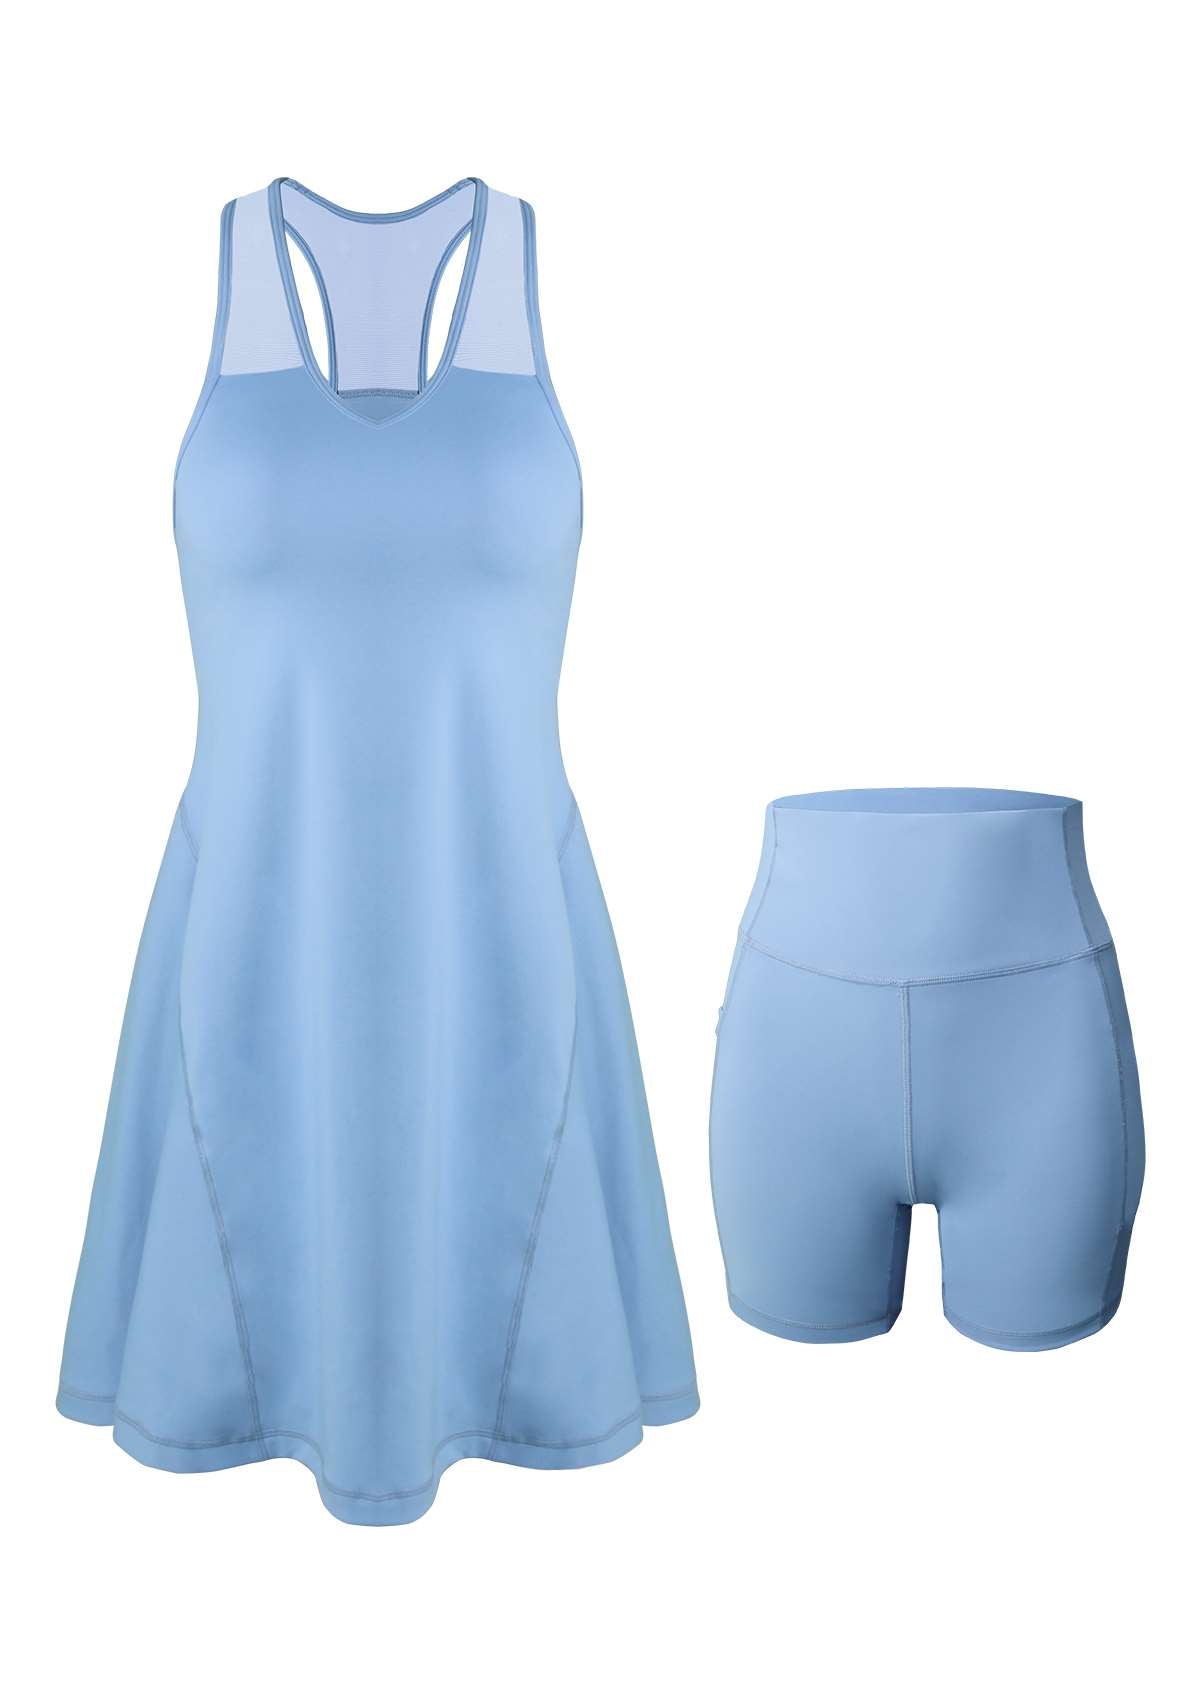 SONGFUL On The Move Sports Dress With Shorts Set - S / Coral